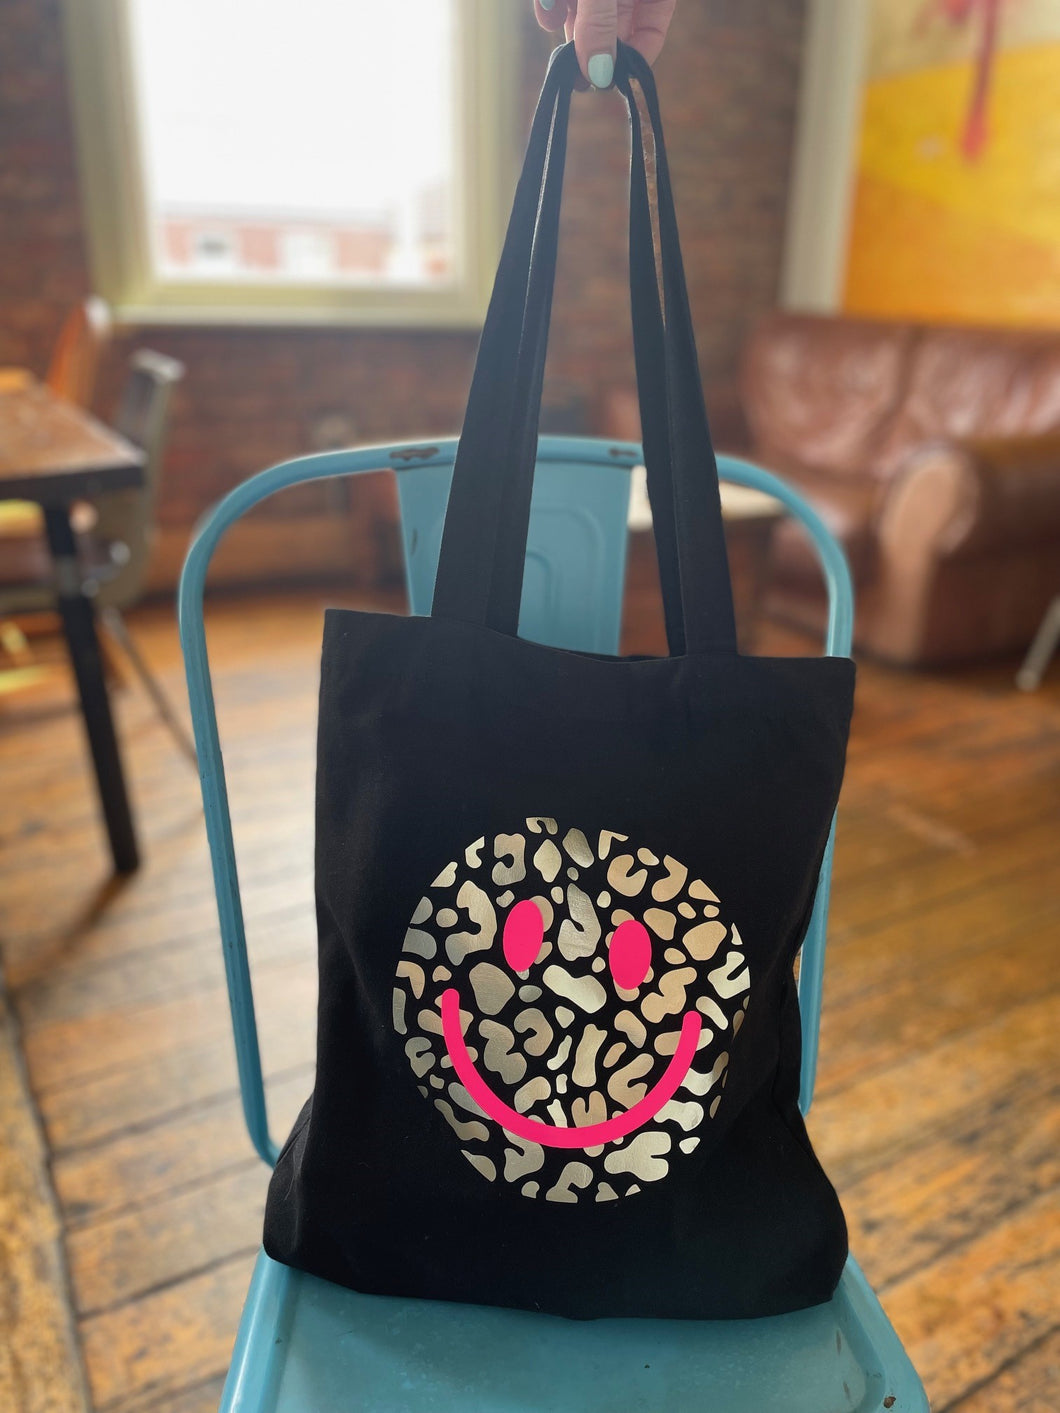 Smiley shopper - Personalised